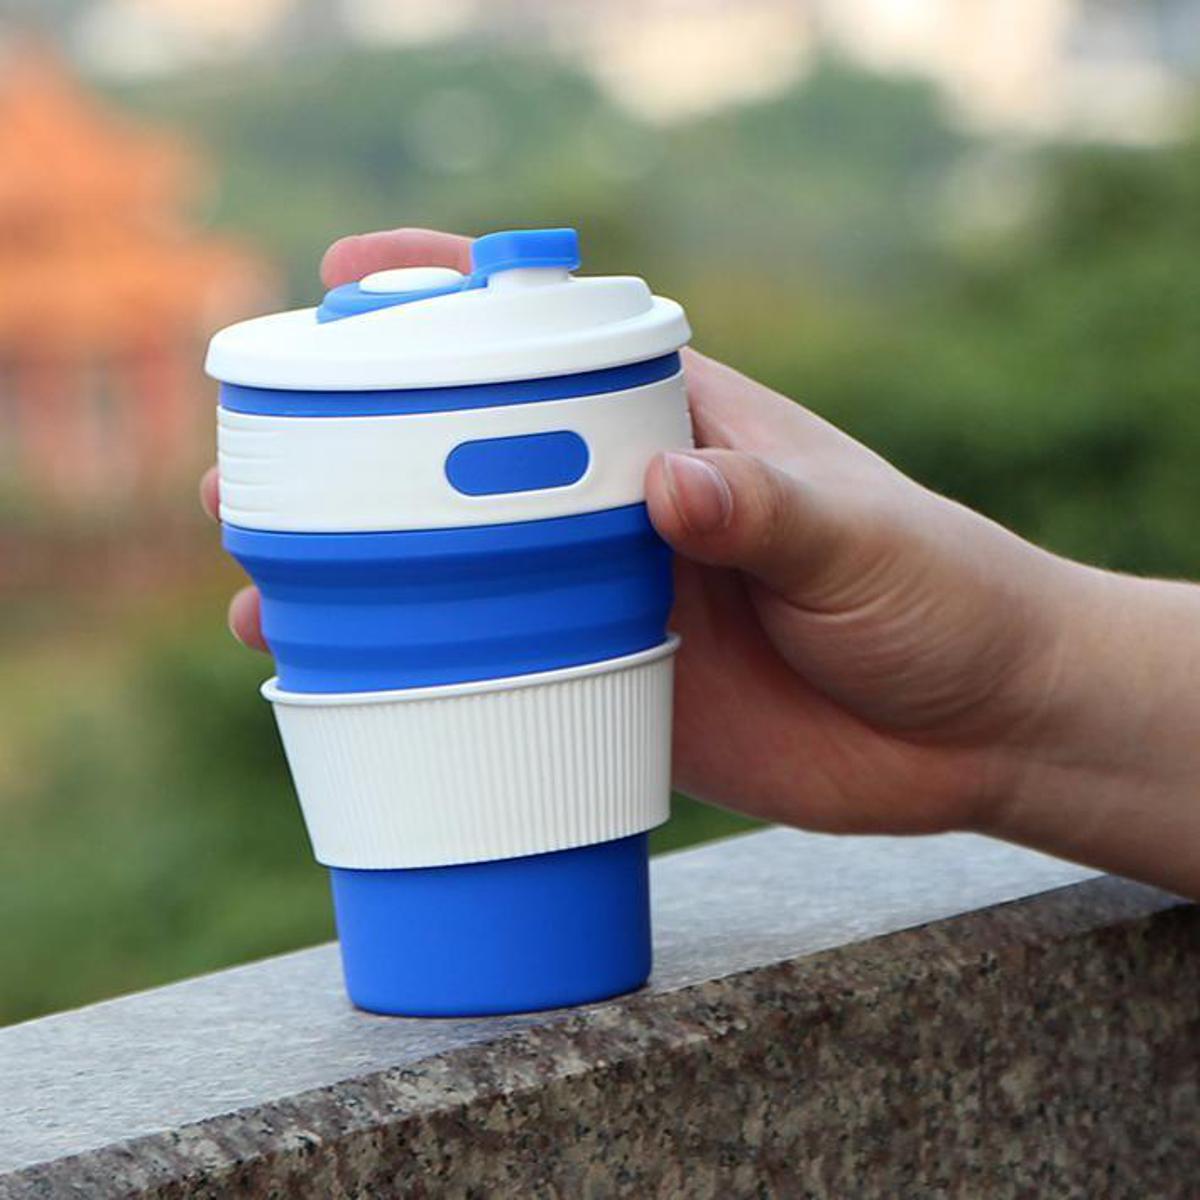 Folding Silicone Cup, Portable Silicone Telescopic Drinking Collapsible Coffee Cup, Multi-function Foldable Silica Mug Travel (Blue)